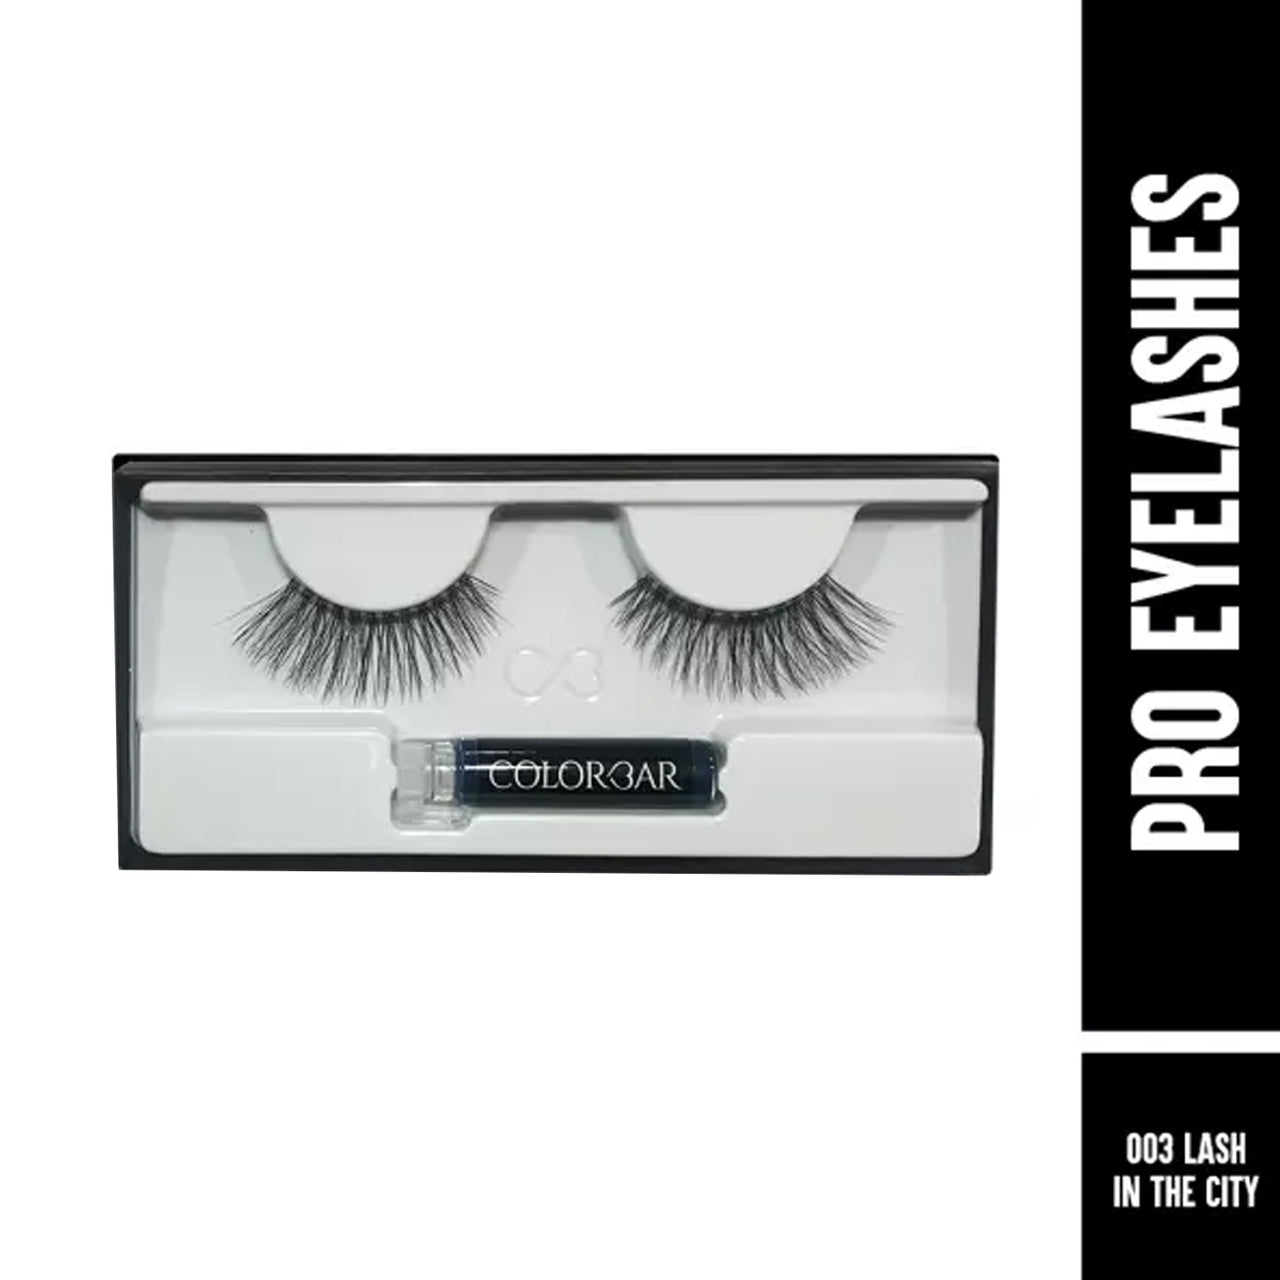 Colorbar Pro Eyelashes Lash In The City - Distacart